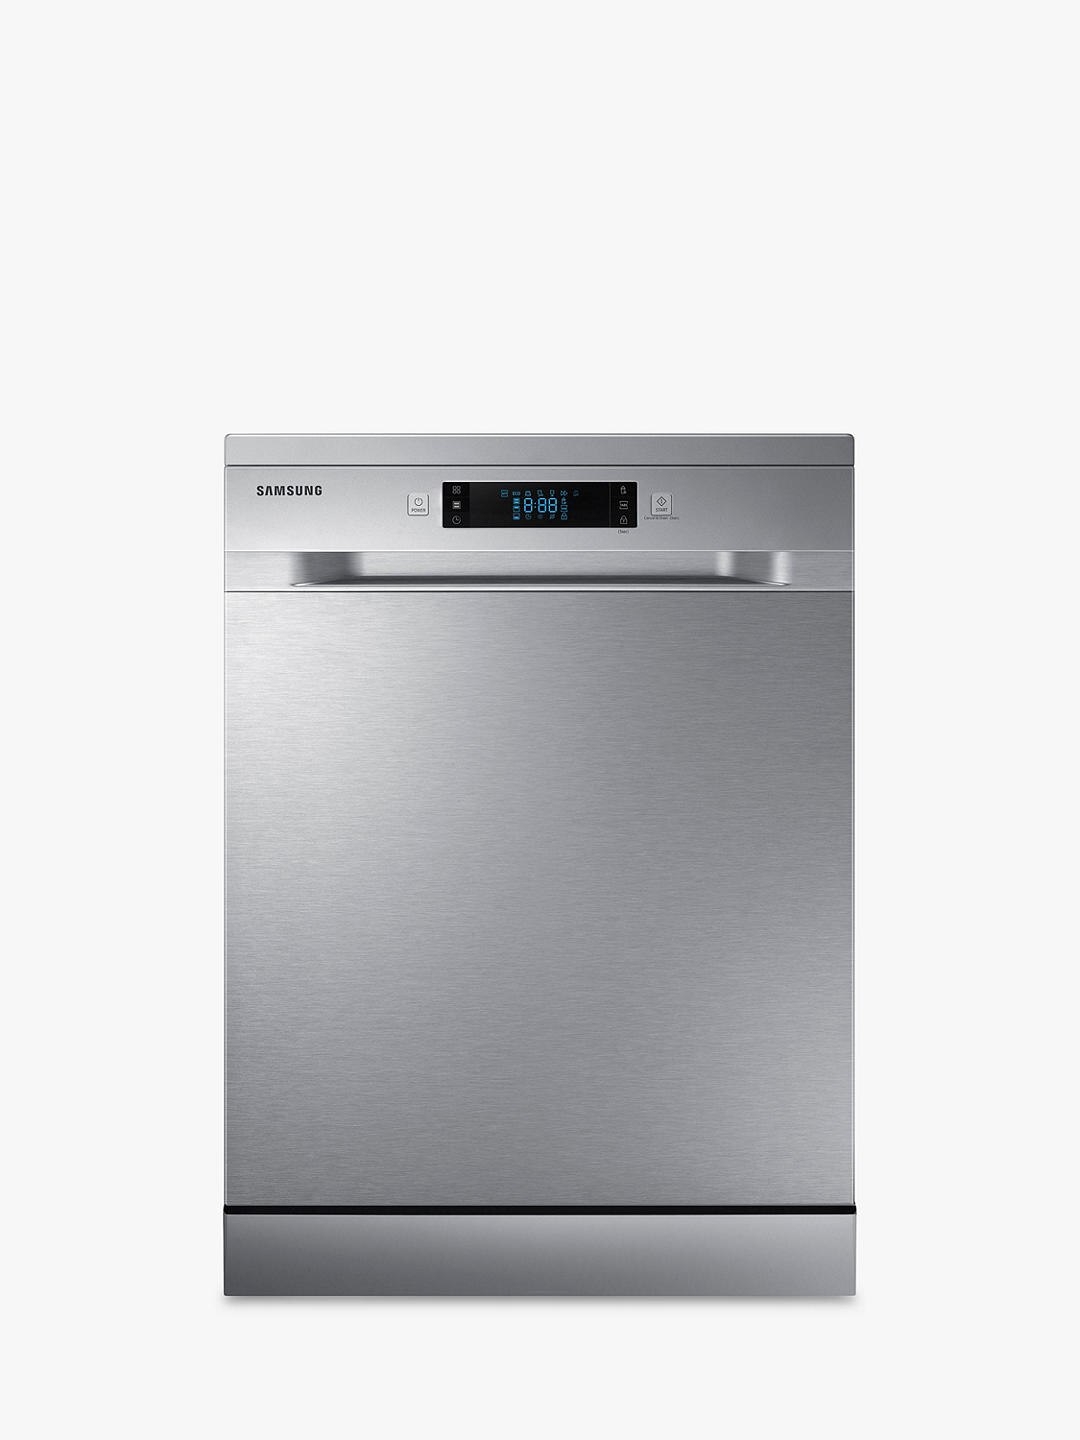 Samsung Series 6 DW60M6050FS Freestanding 60cm Dishwasher|14 Place Setting - Stainless Steel *Display Model*